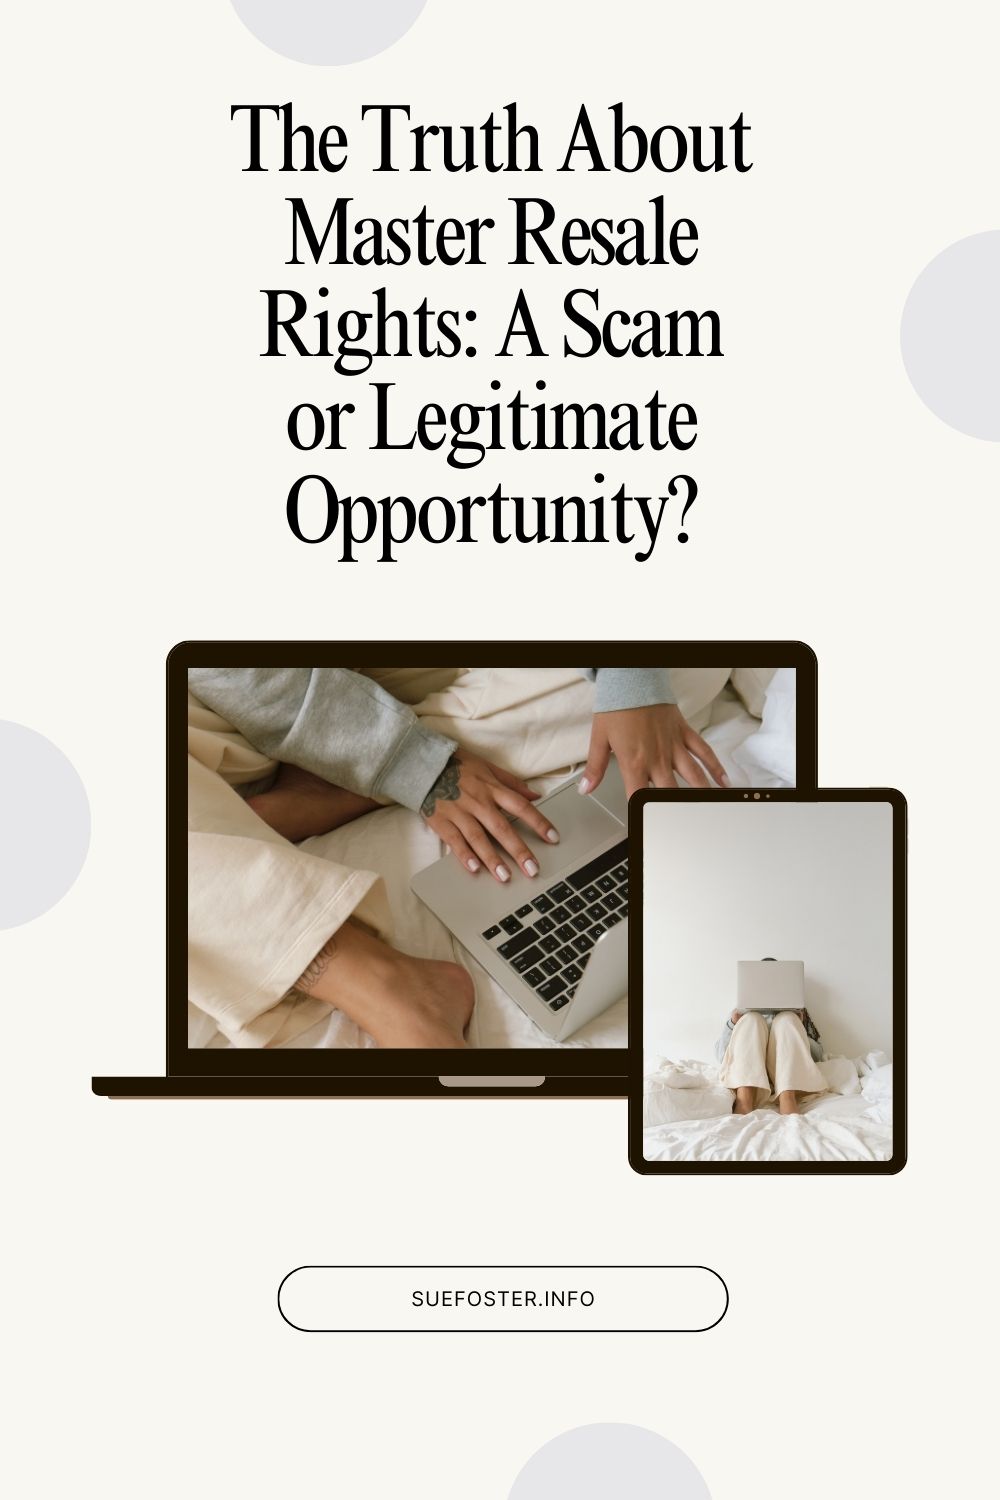 The Truth About Master Resale Rights A Scam or Legitimate Opportunity